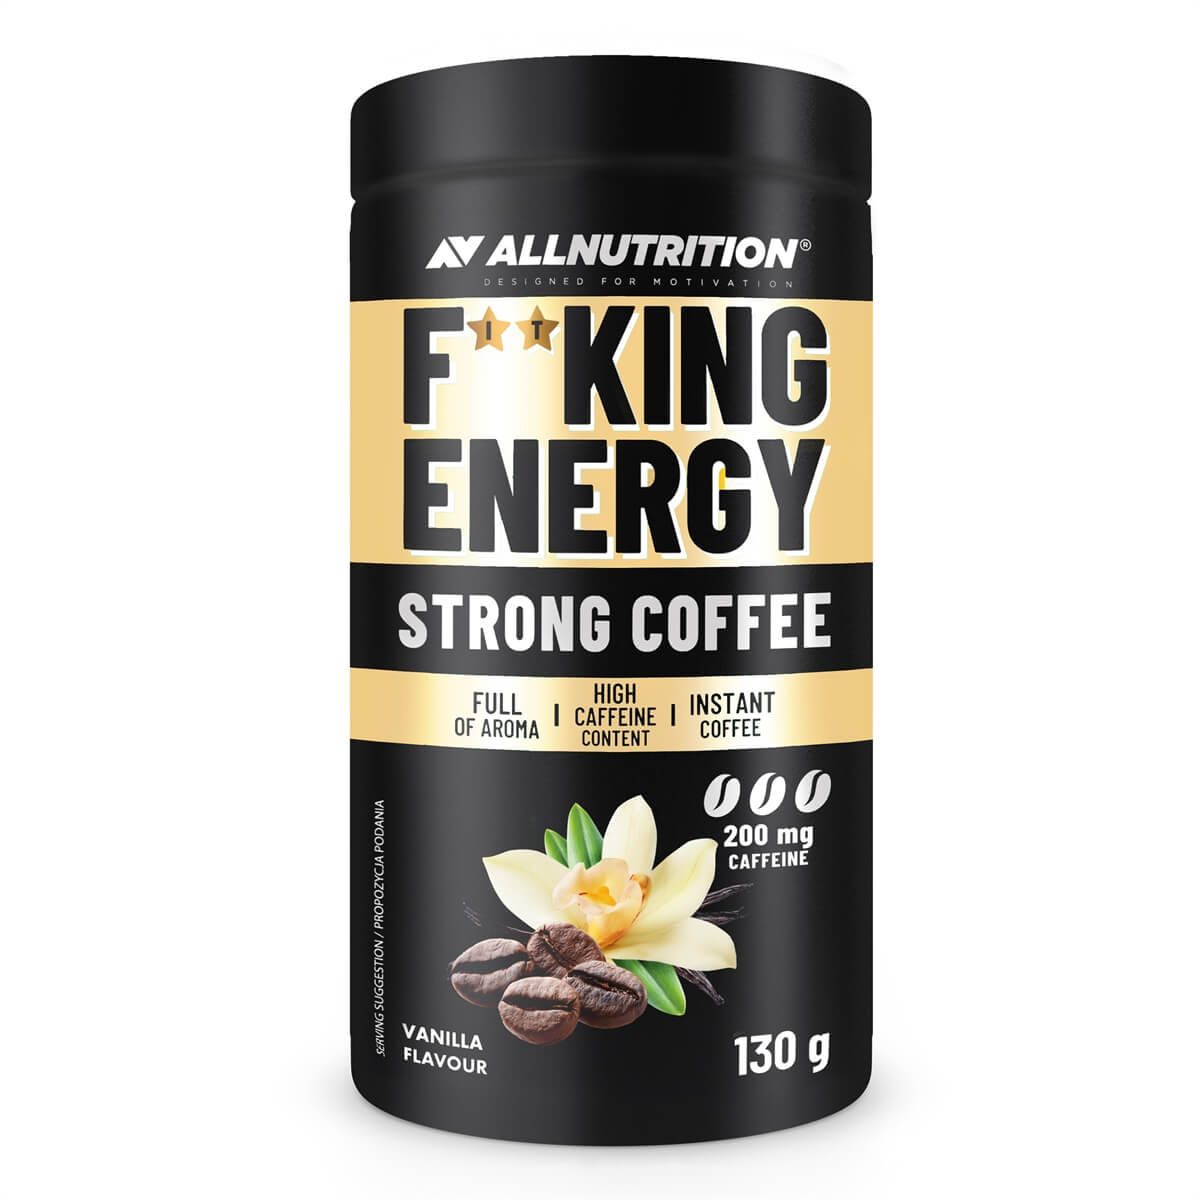 Fitking Delicious Energy Strong Coffee - Vanilla 130g